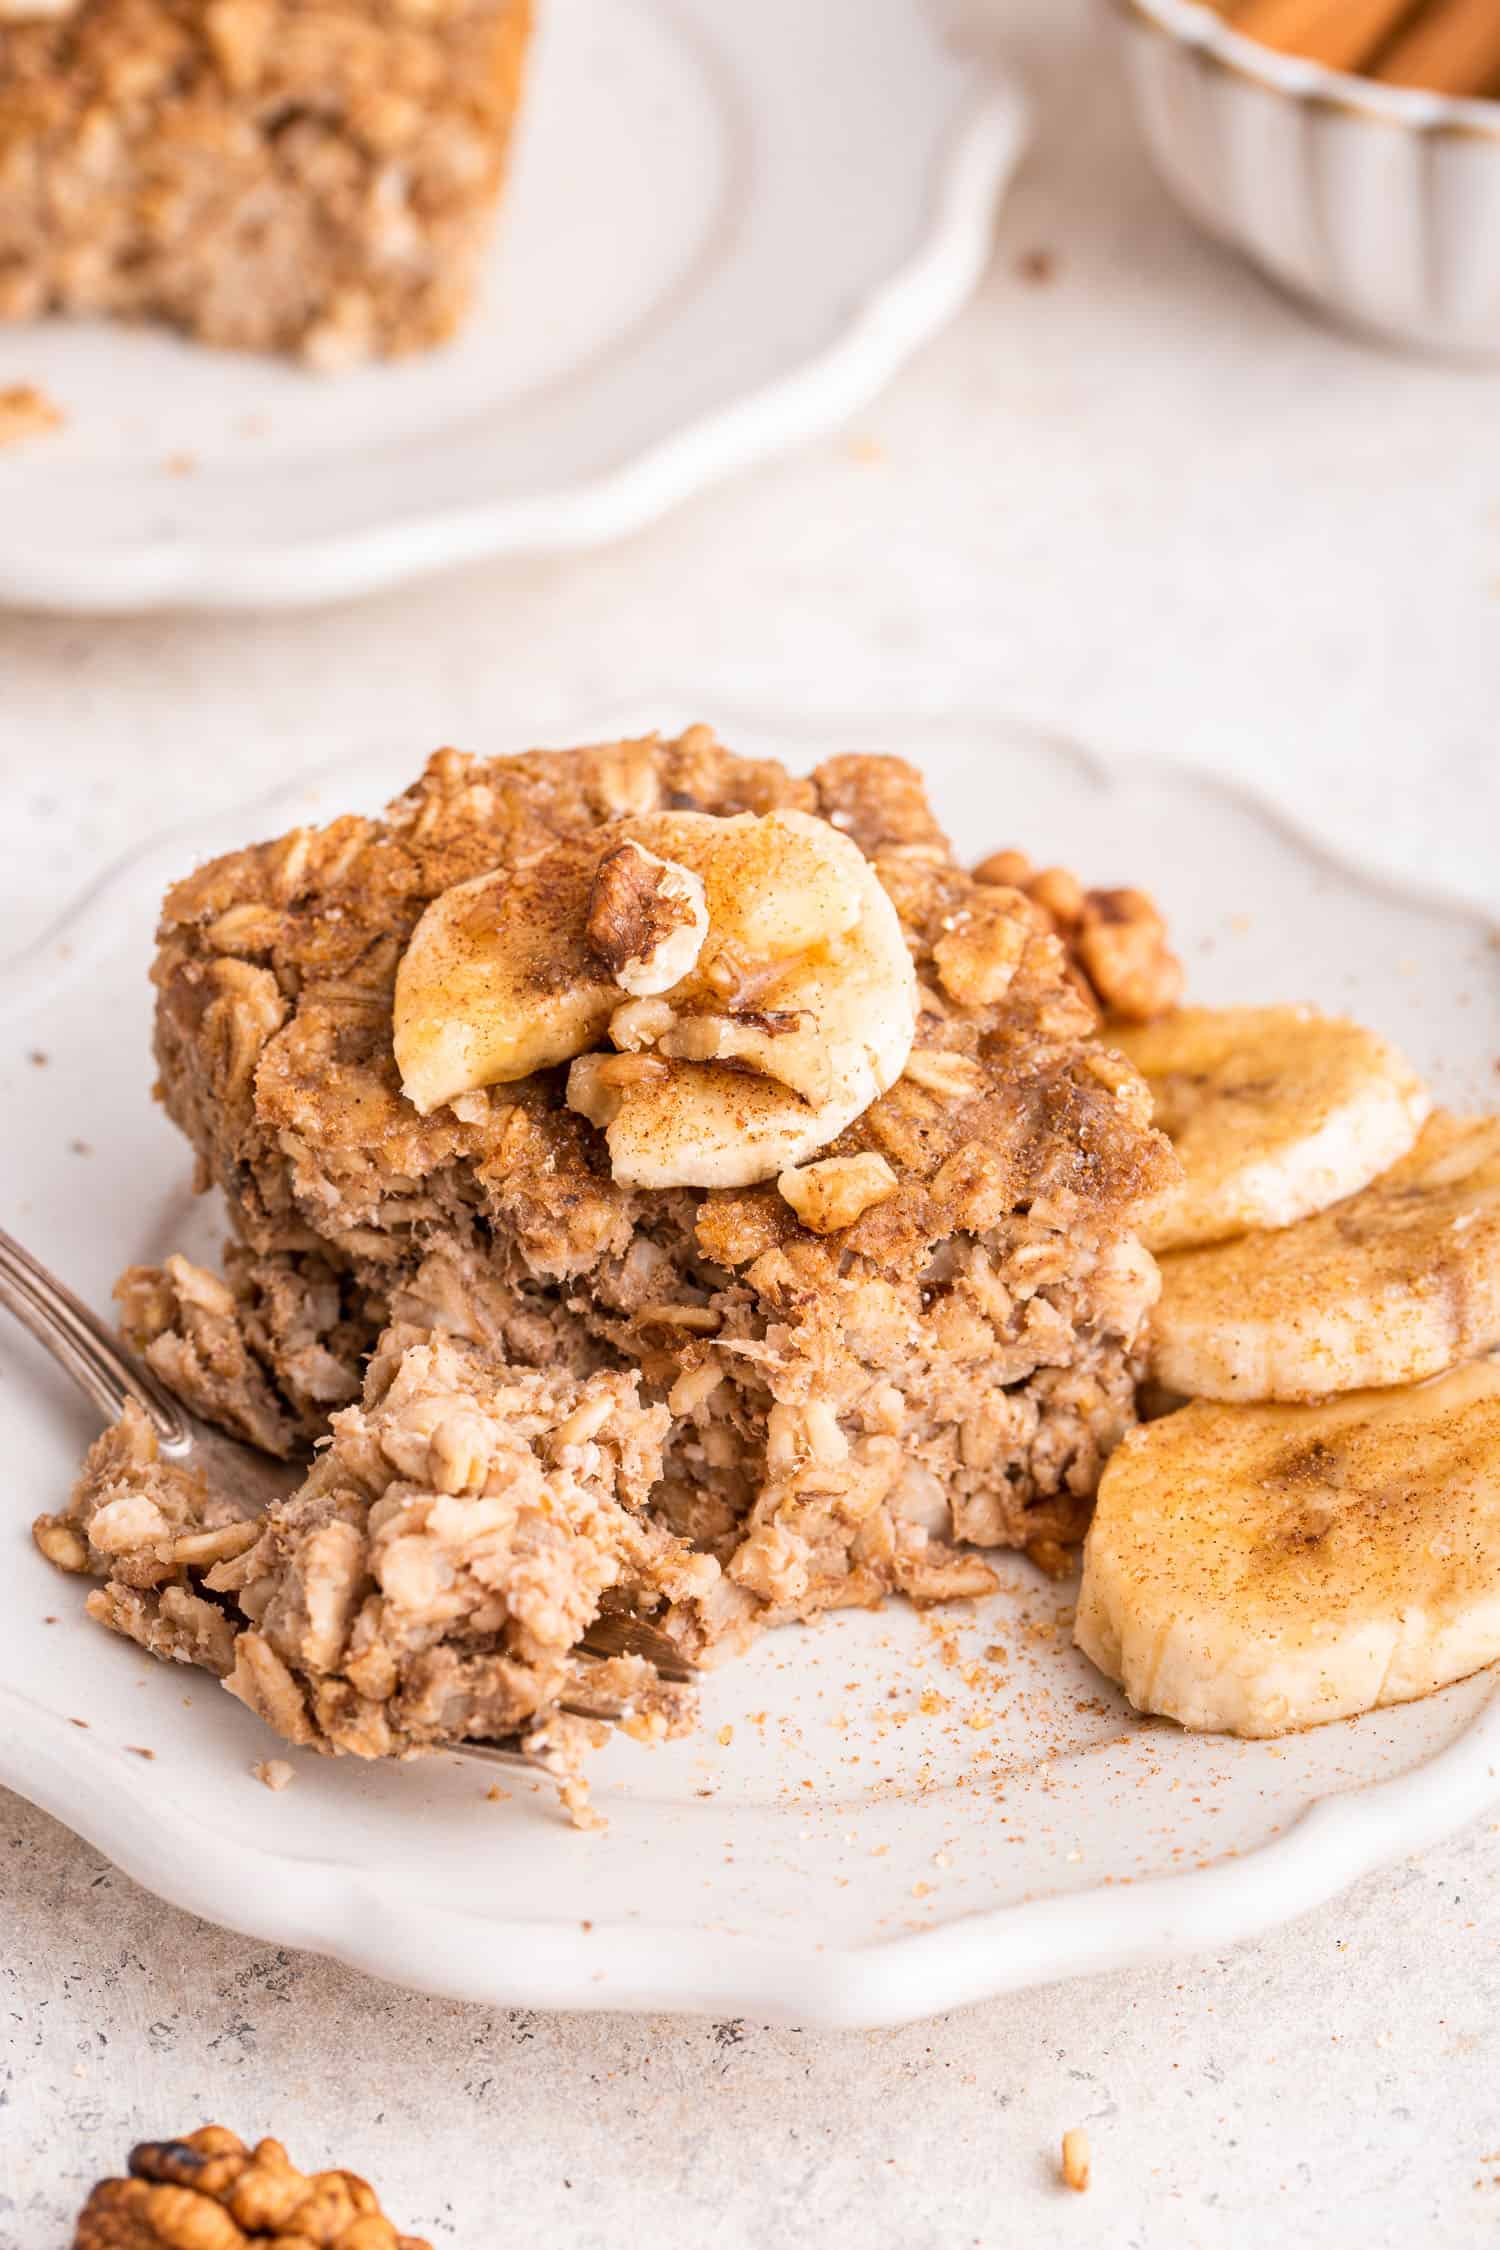 side view of baked oats on white dish with bananas